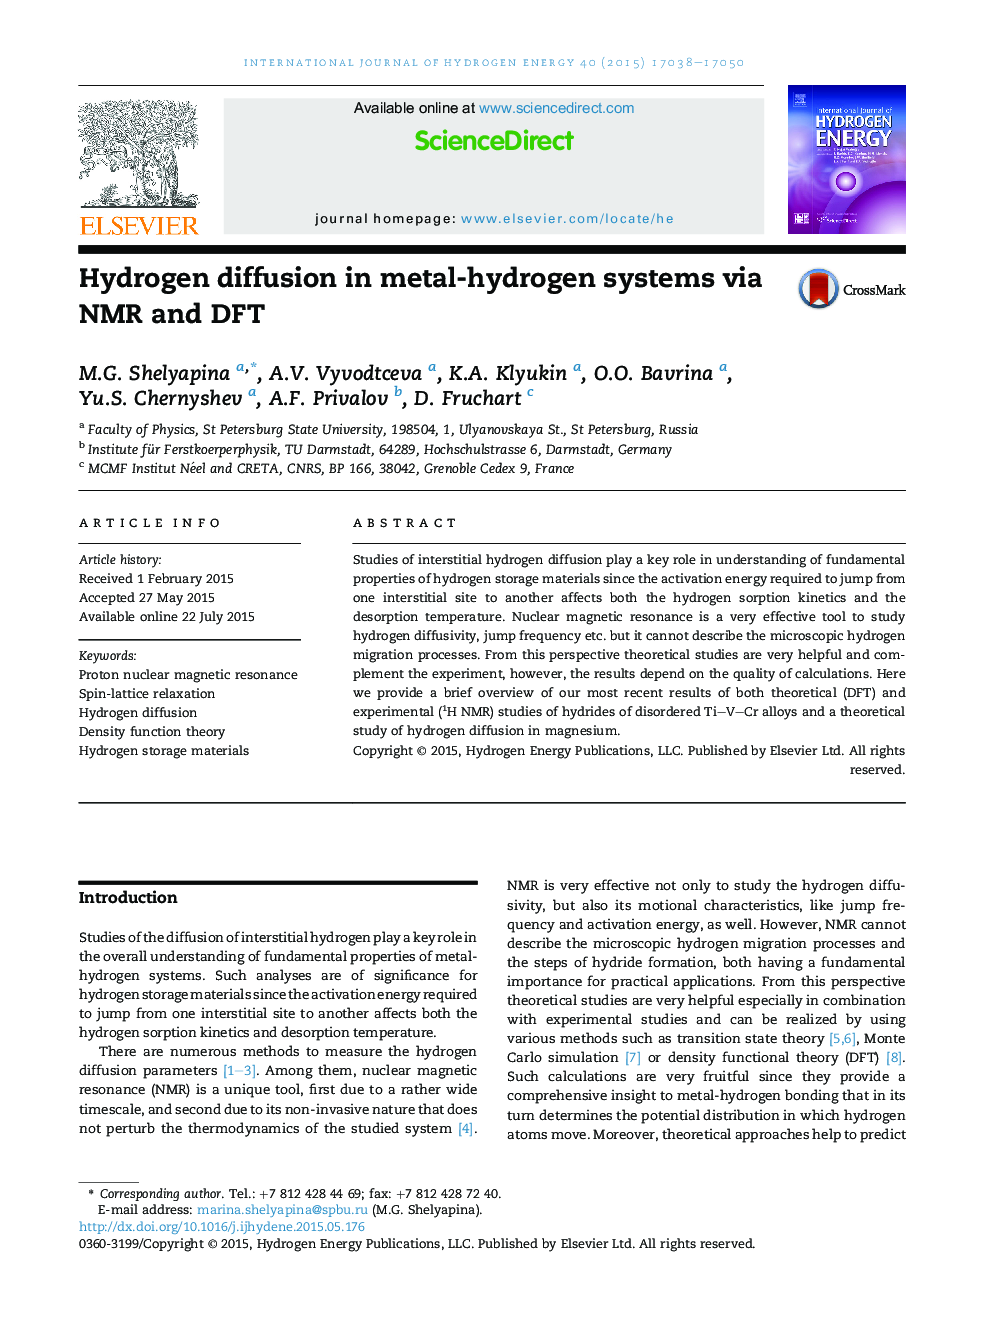 Hydrogen diffusion in metal-hydrogen systems via NMR and DFT